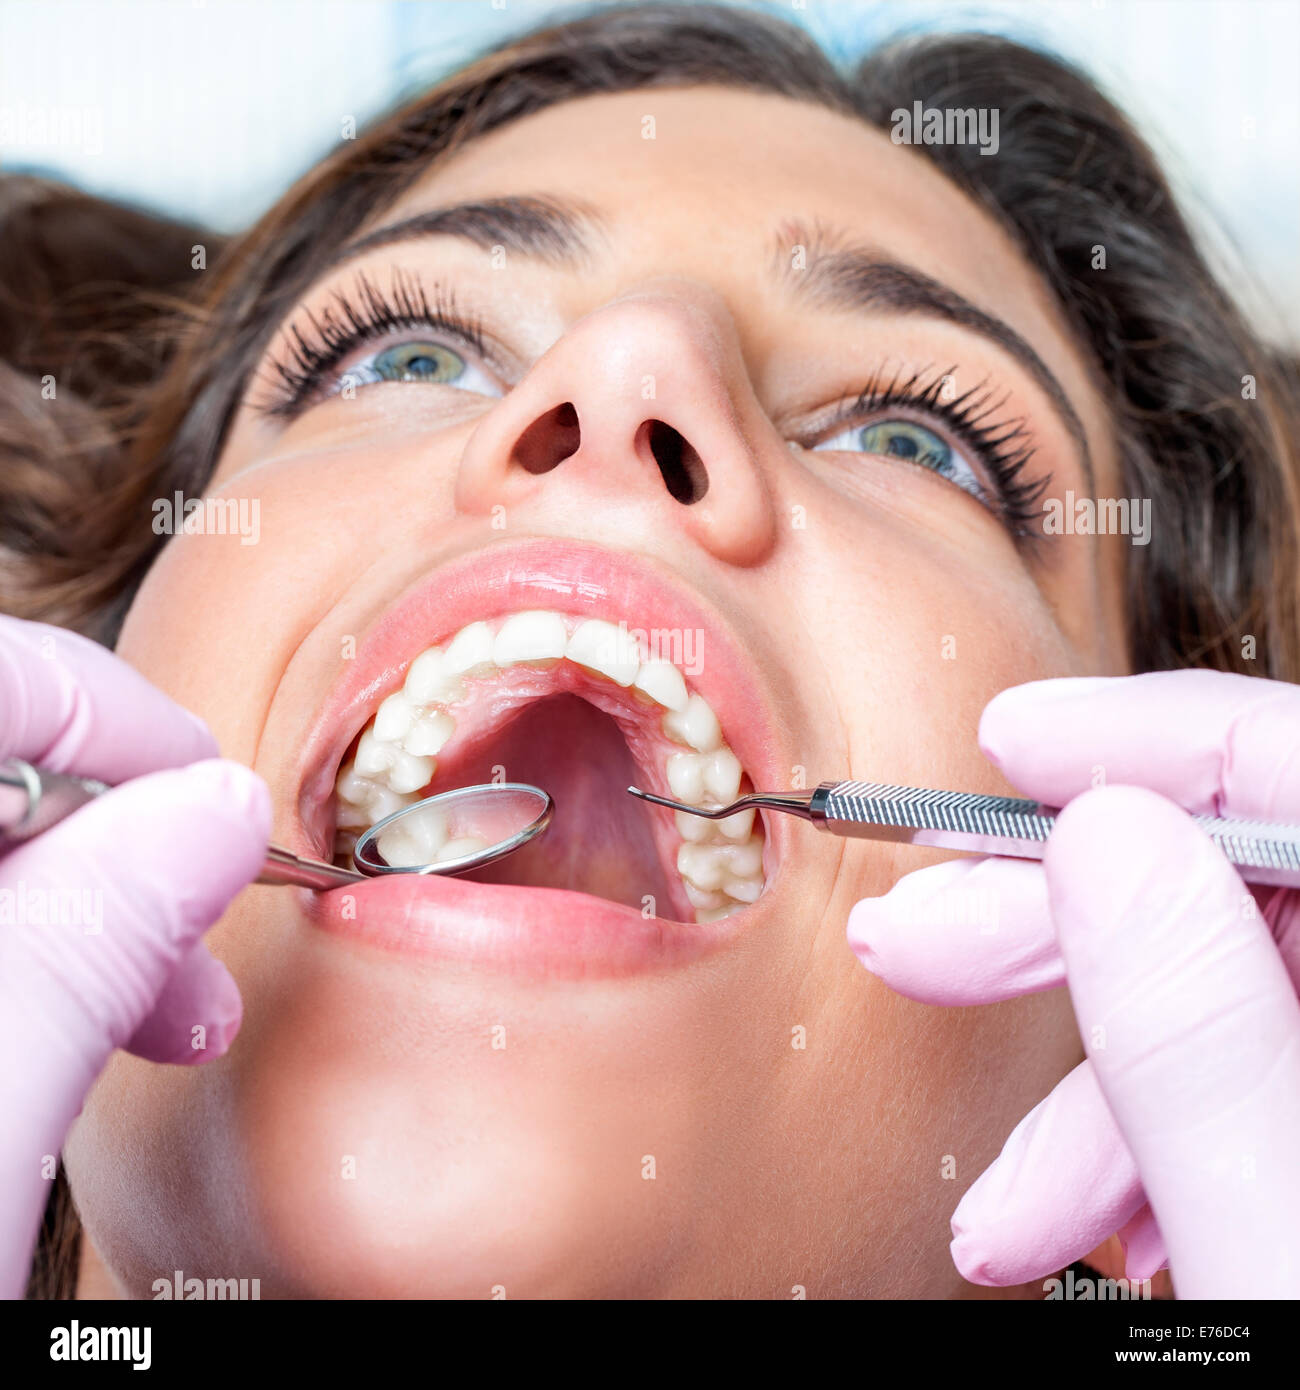 Extreme close up of Woman with open mouth at dental check up Stock Photo